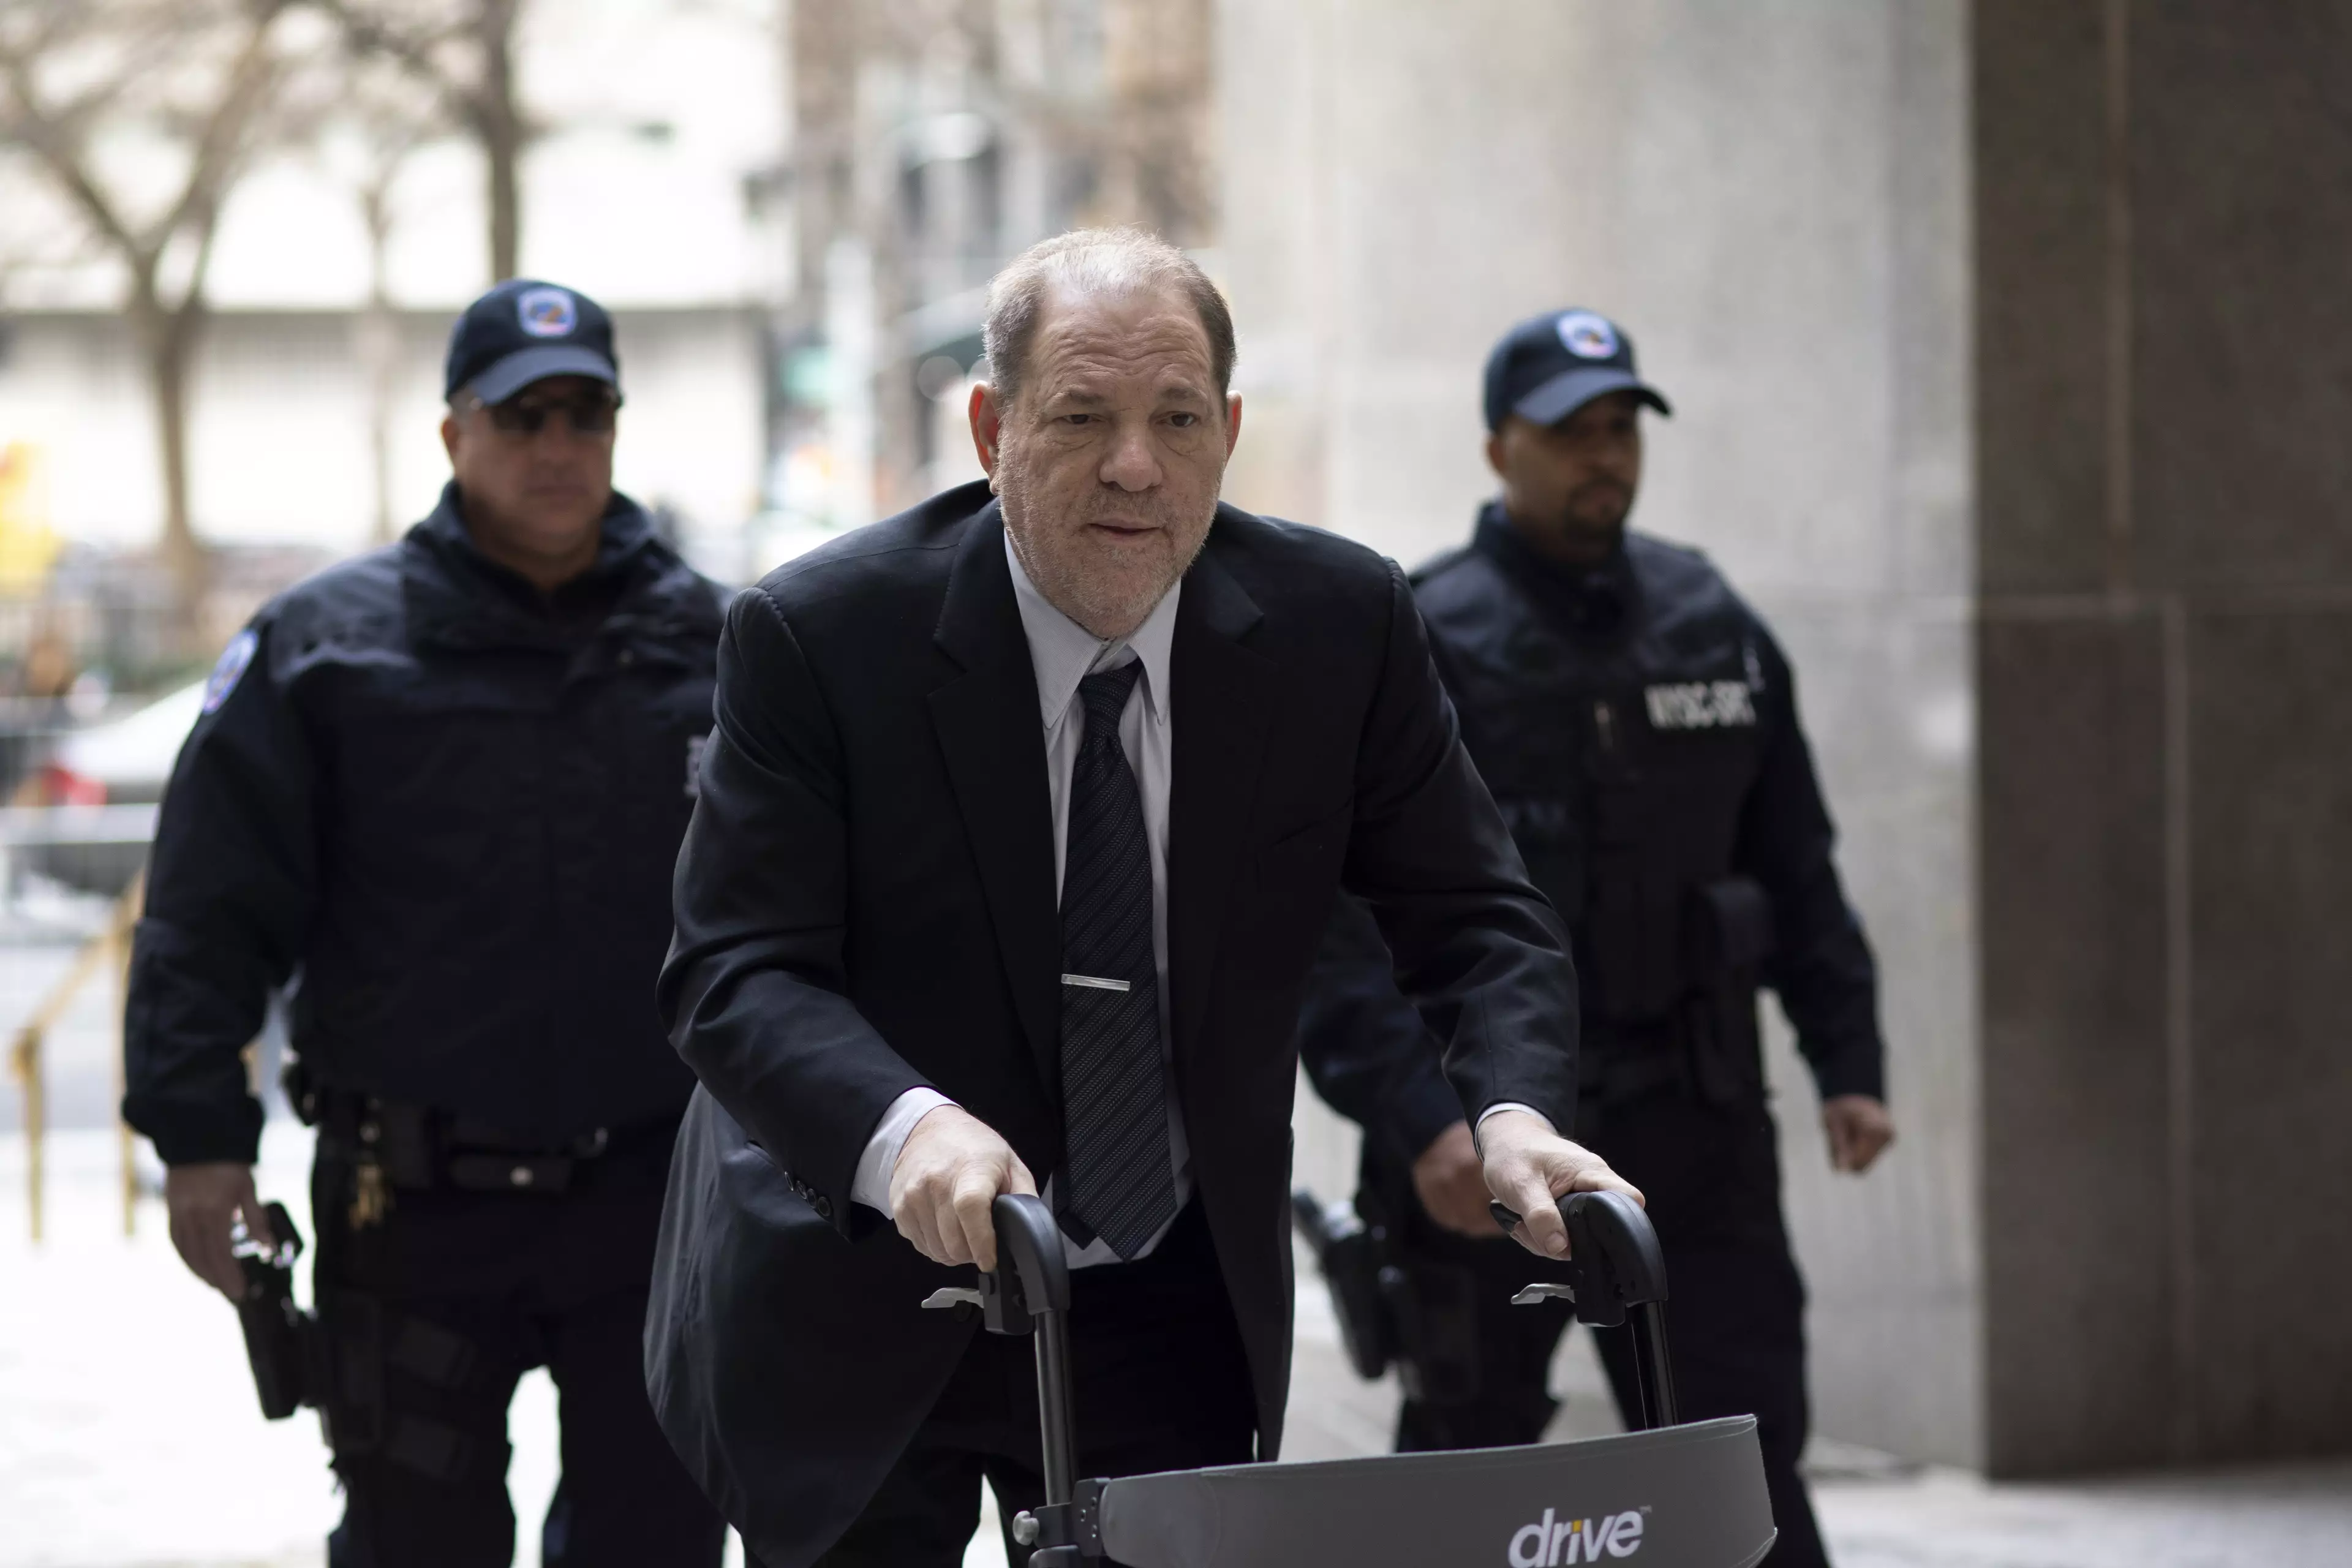 Harvey Weinstein arriving at court on Monday 3rd February (